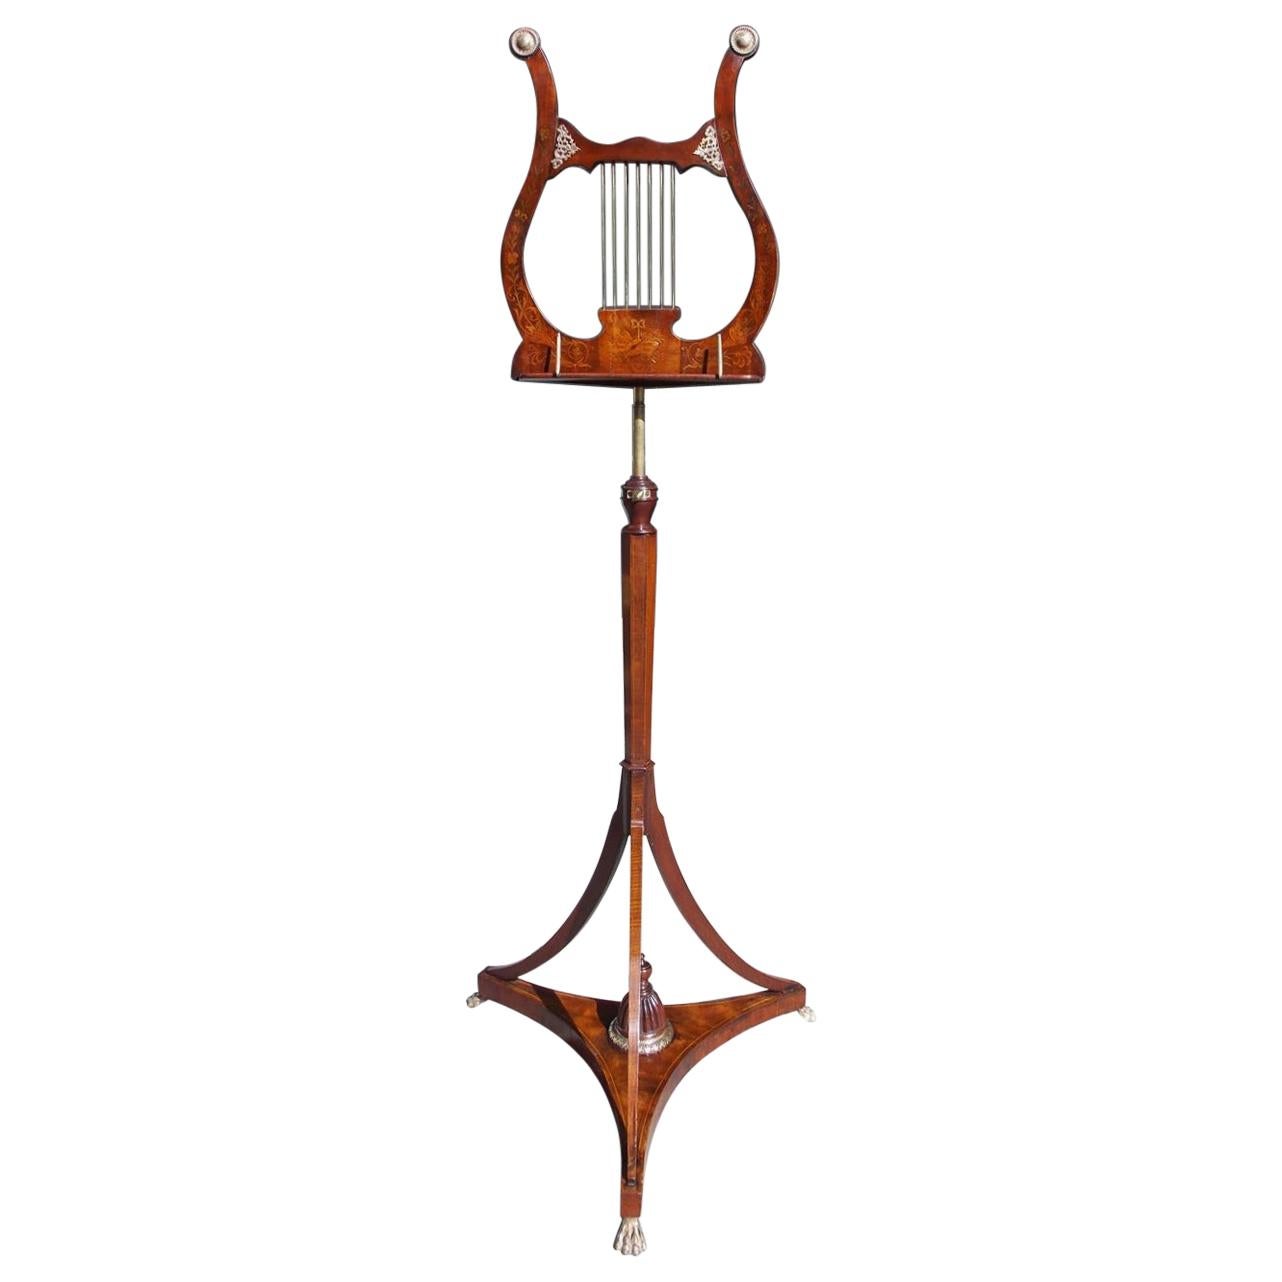 English Mahogany Bronze Mounted and Inlaid Lyre Music Stand on Paw Feet. C. 1800